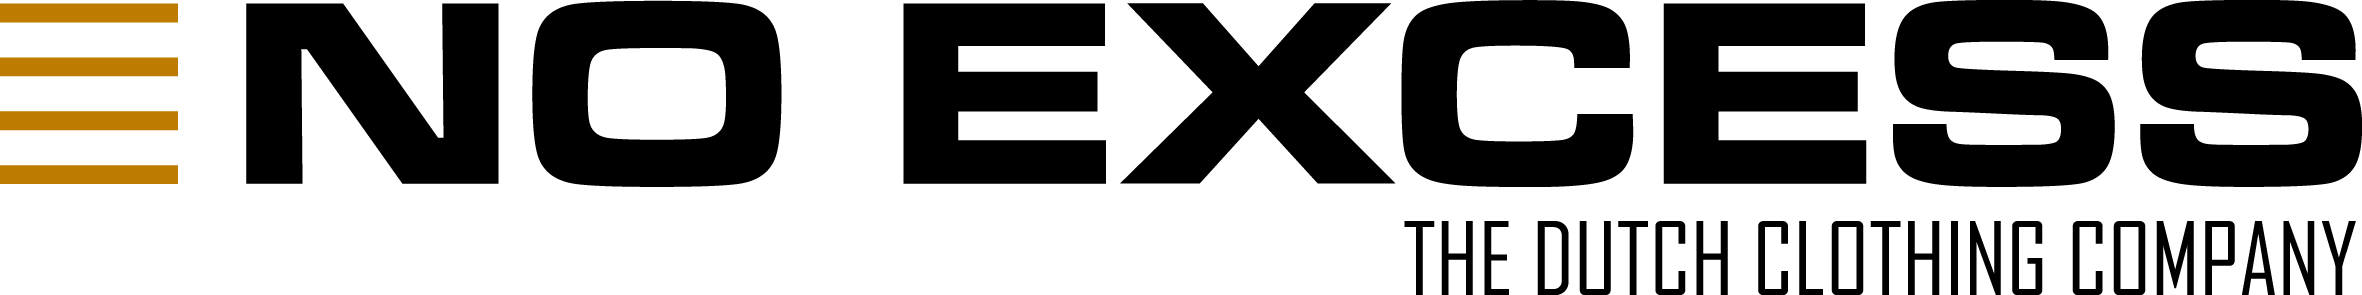 LOGO_NO%20EXCESS_with%20additive_BLACK.jpg